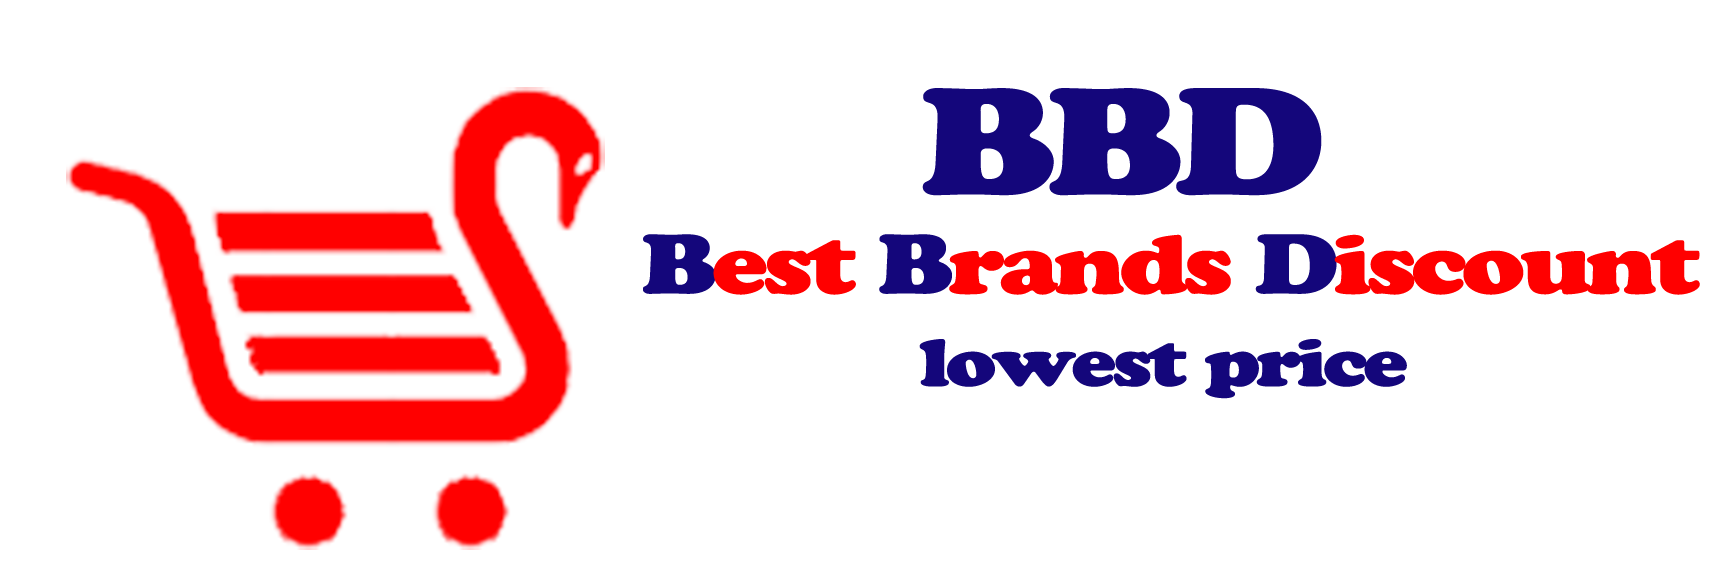 BBD – Best Brands Discount – More than 120 Original Brands are discounted